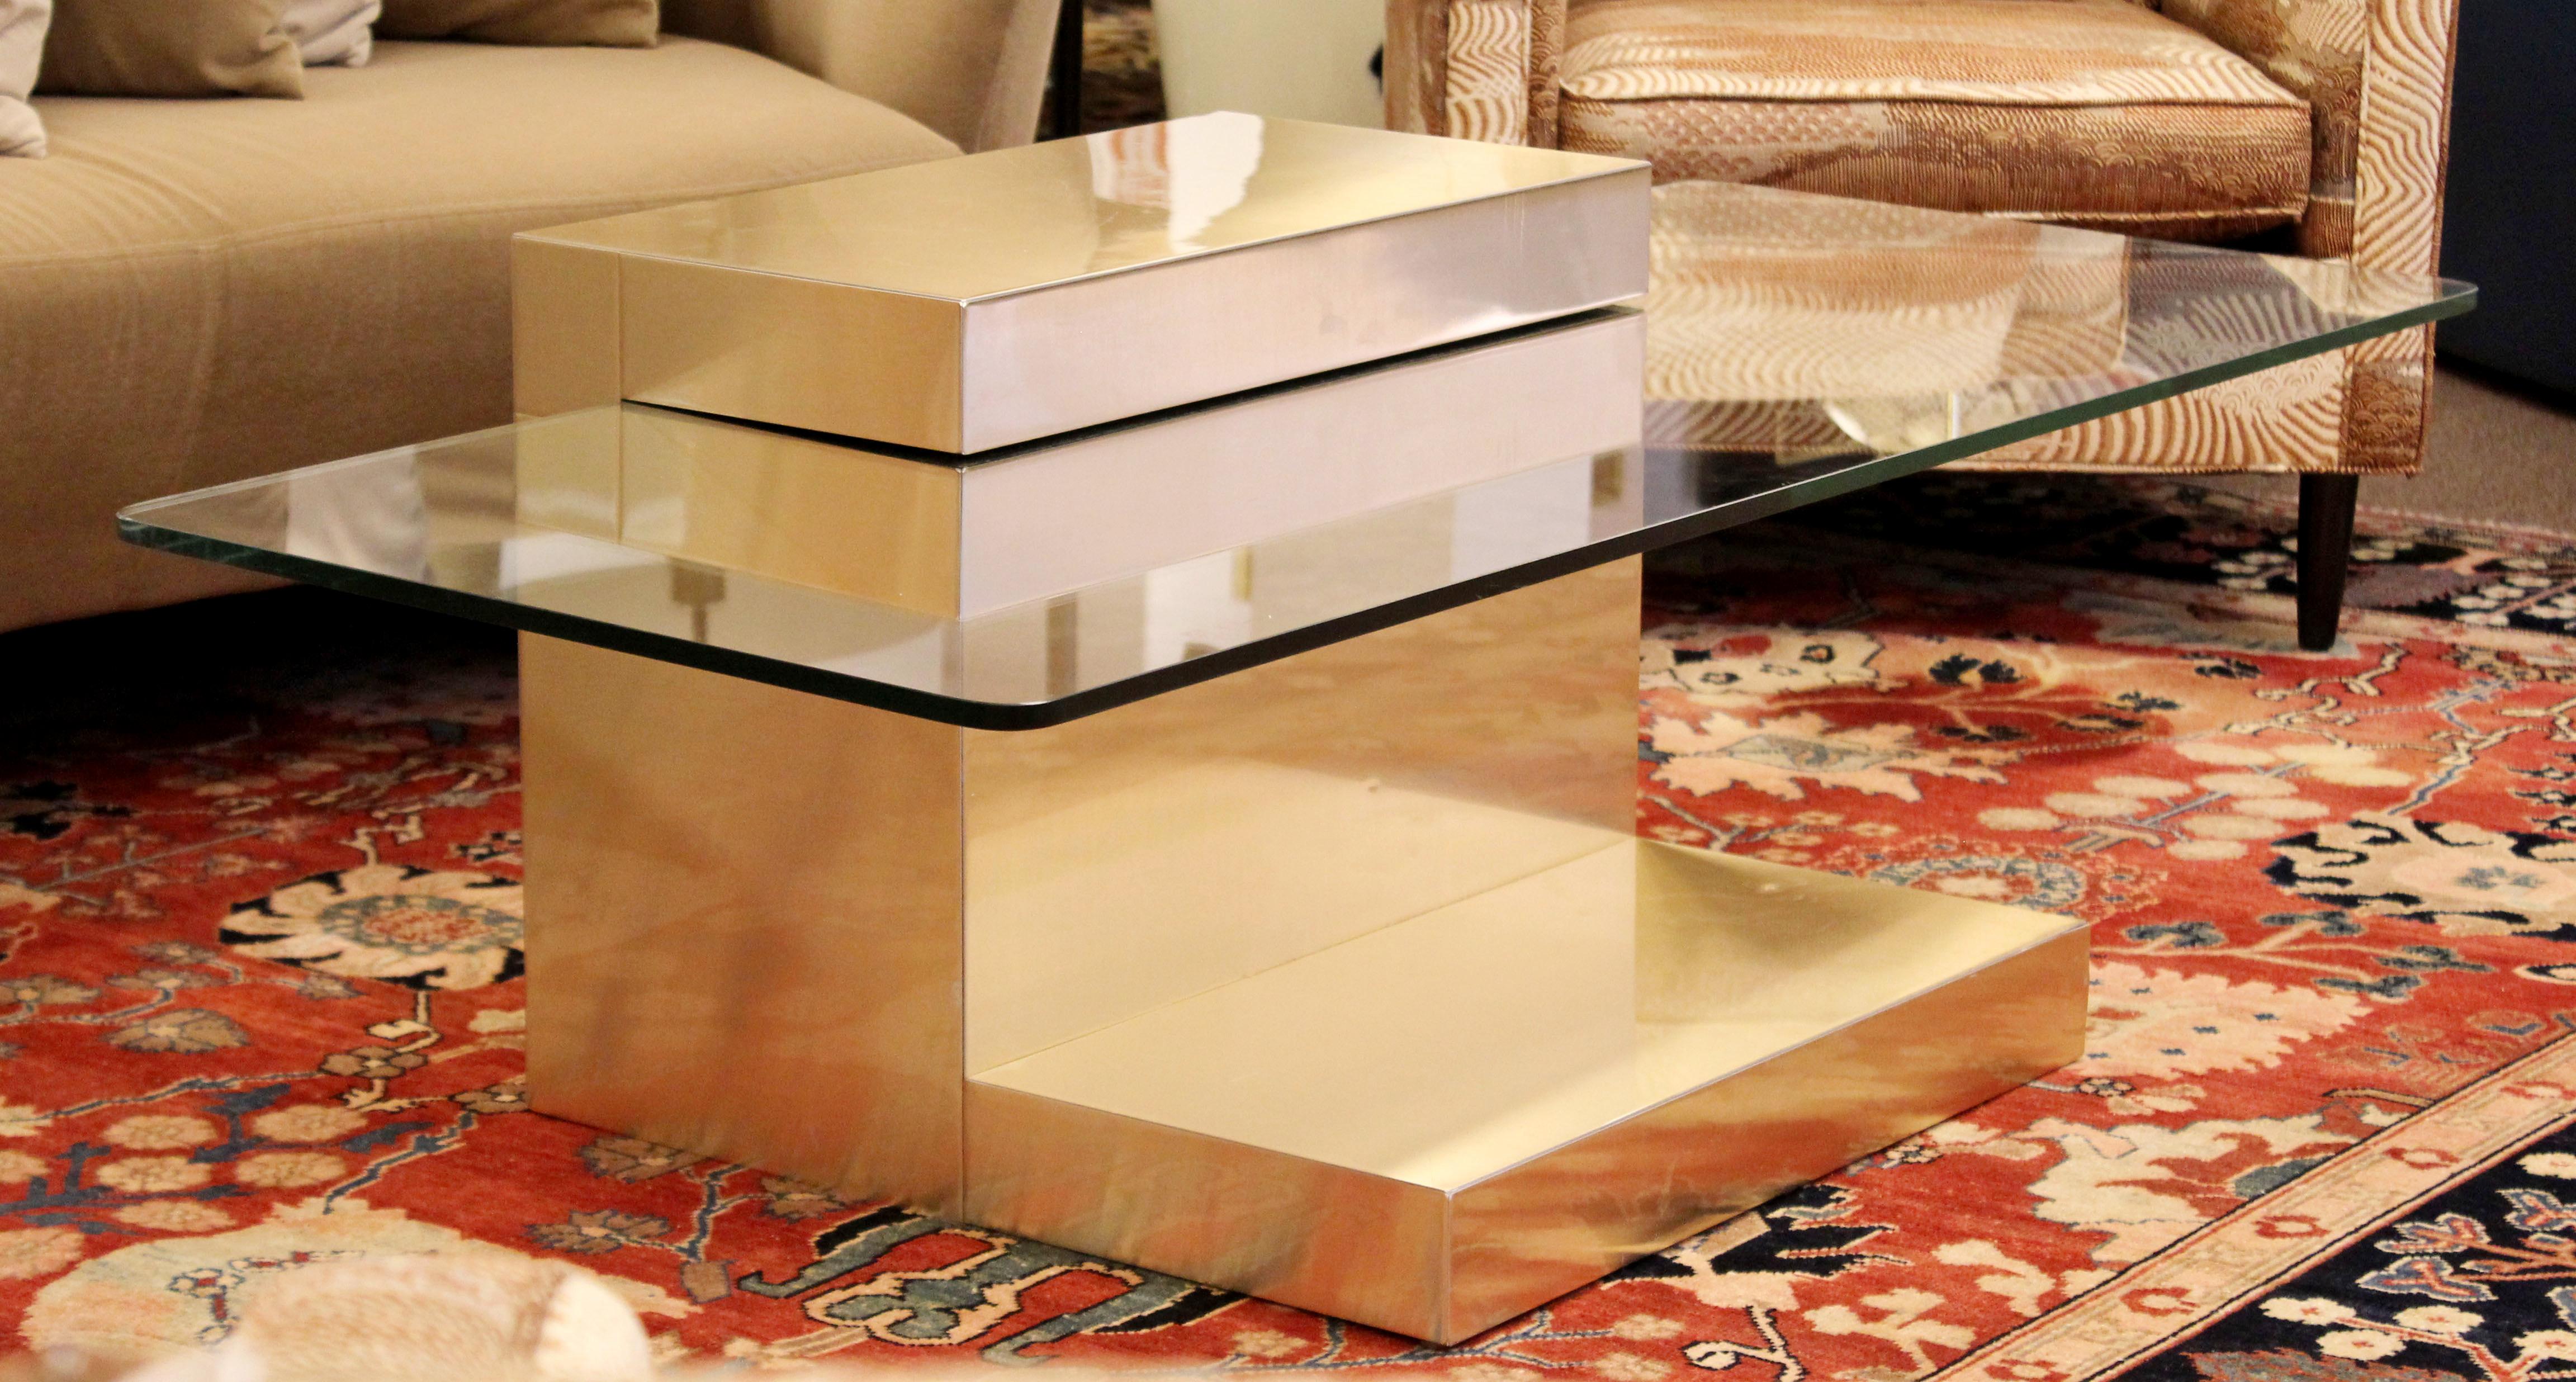 American Mid-Century Modern Paul Evans Cantilever Brass Glass Cityscape Coffee Table